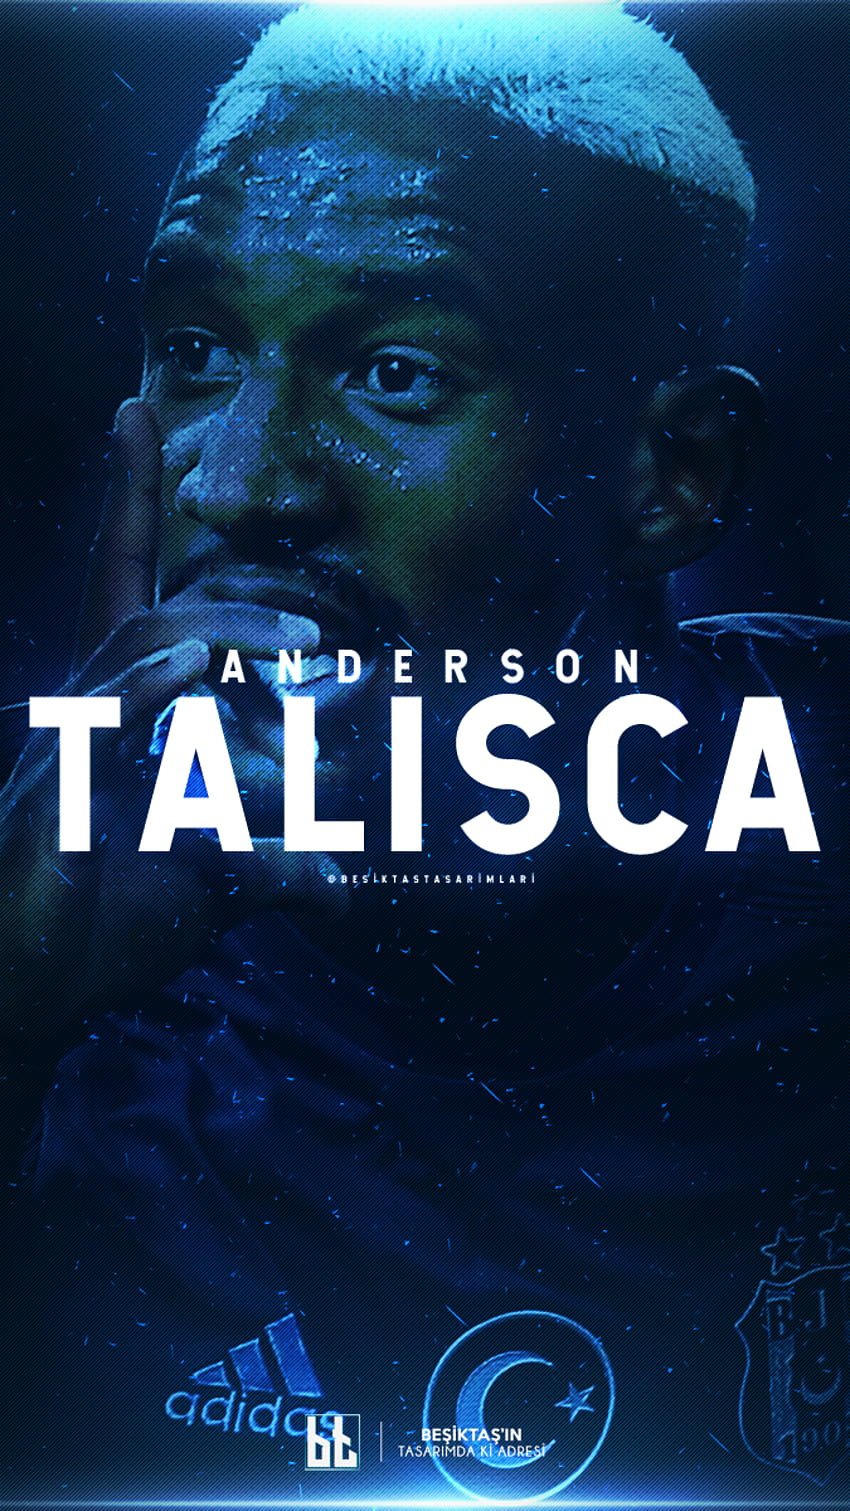 Anderson TALISCA on Behance HD phone wallpaper